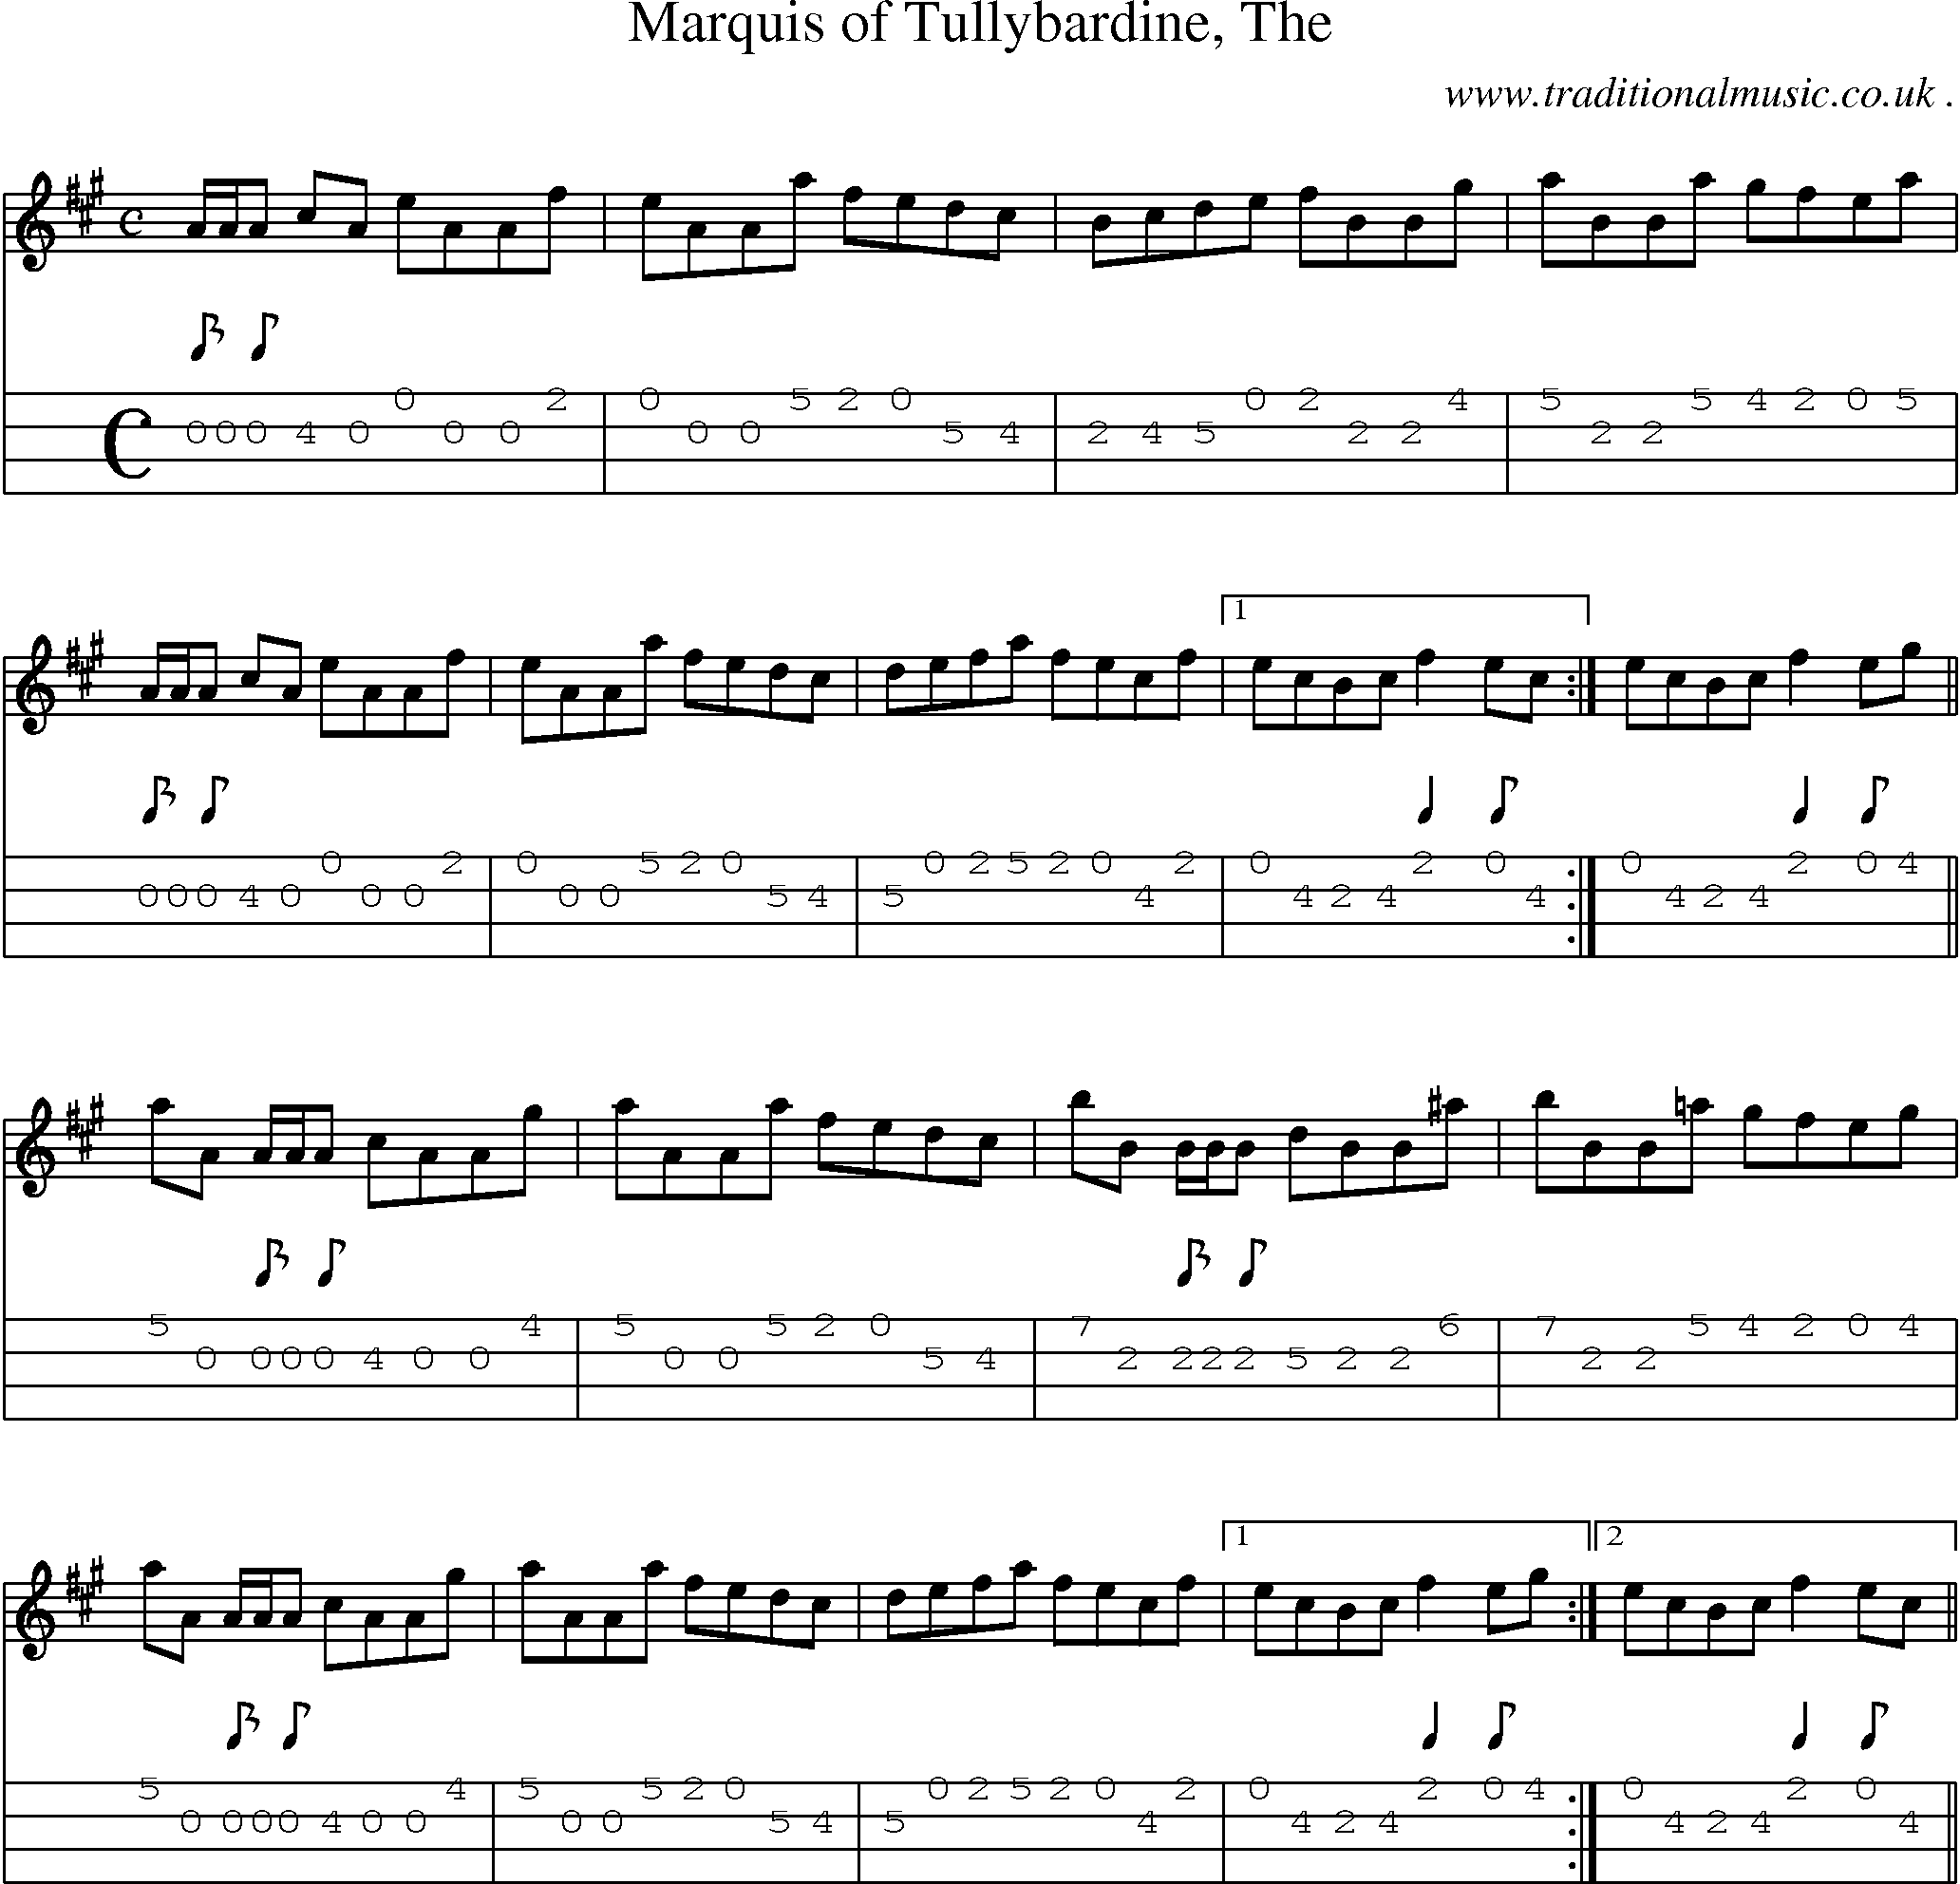 Sheet-music  score, Chords and Mandolin Tabs for Marquis Of Tullybardine The